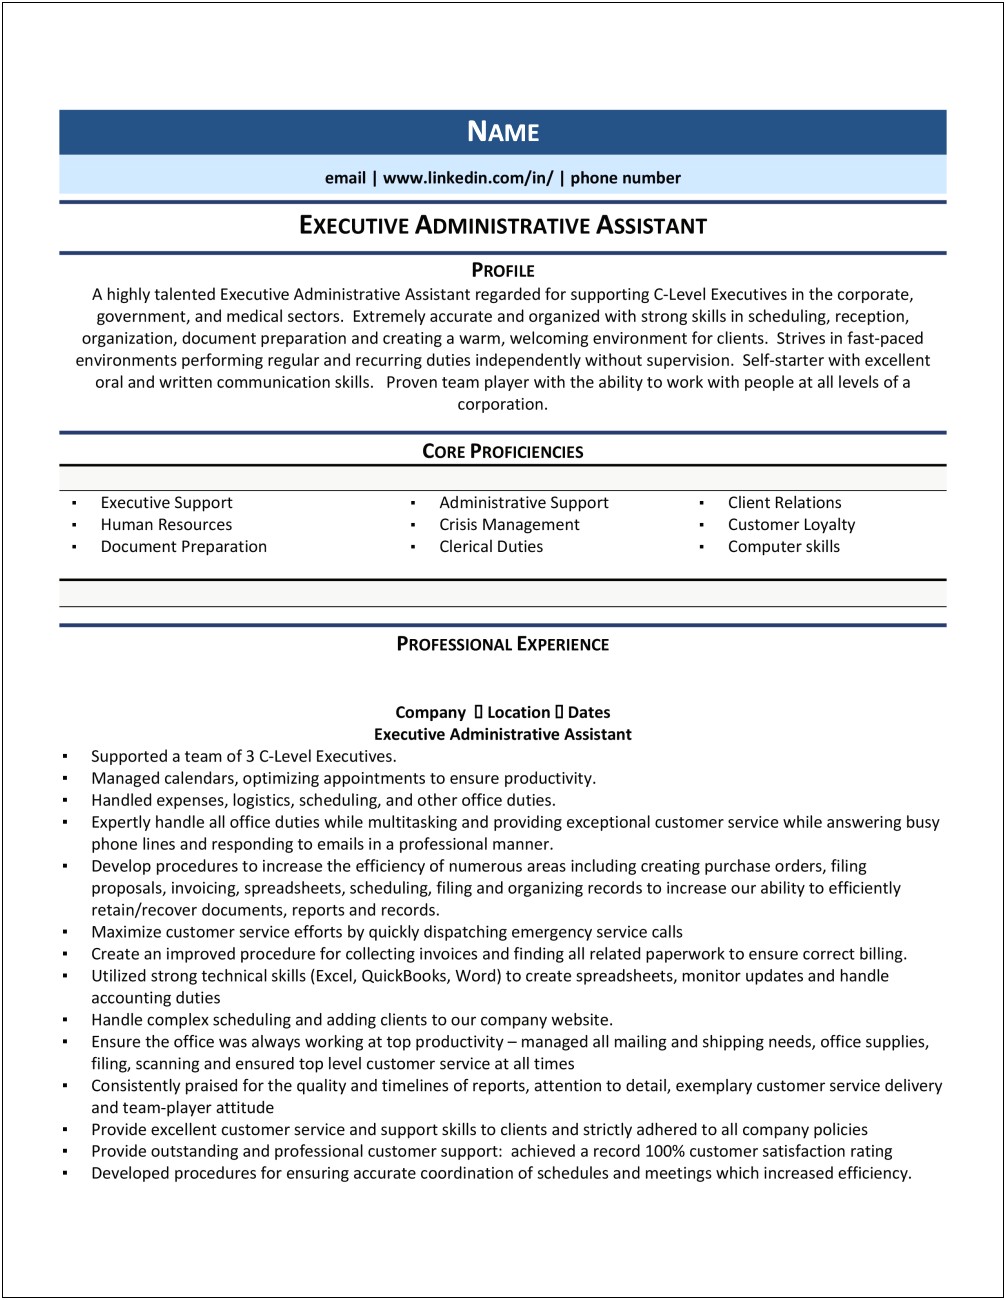 Human Resources Administrative Assistant Resume Objective